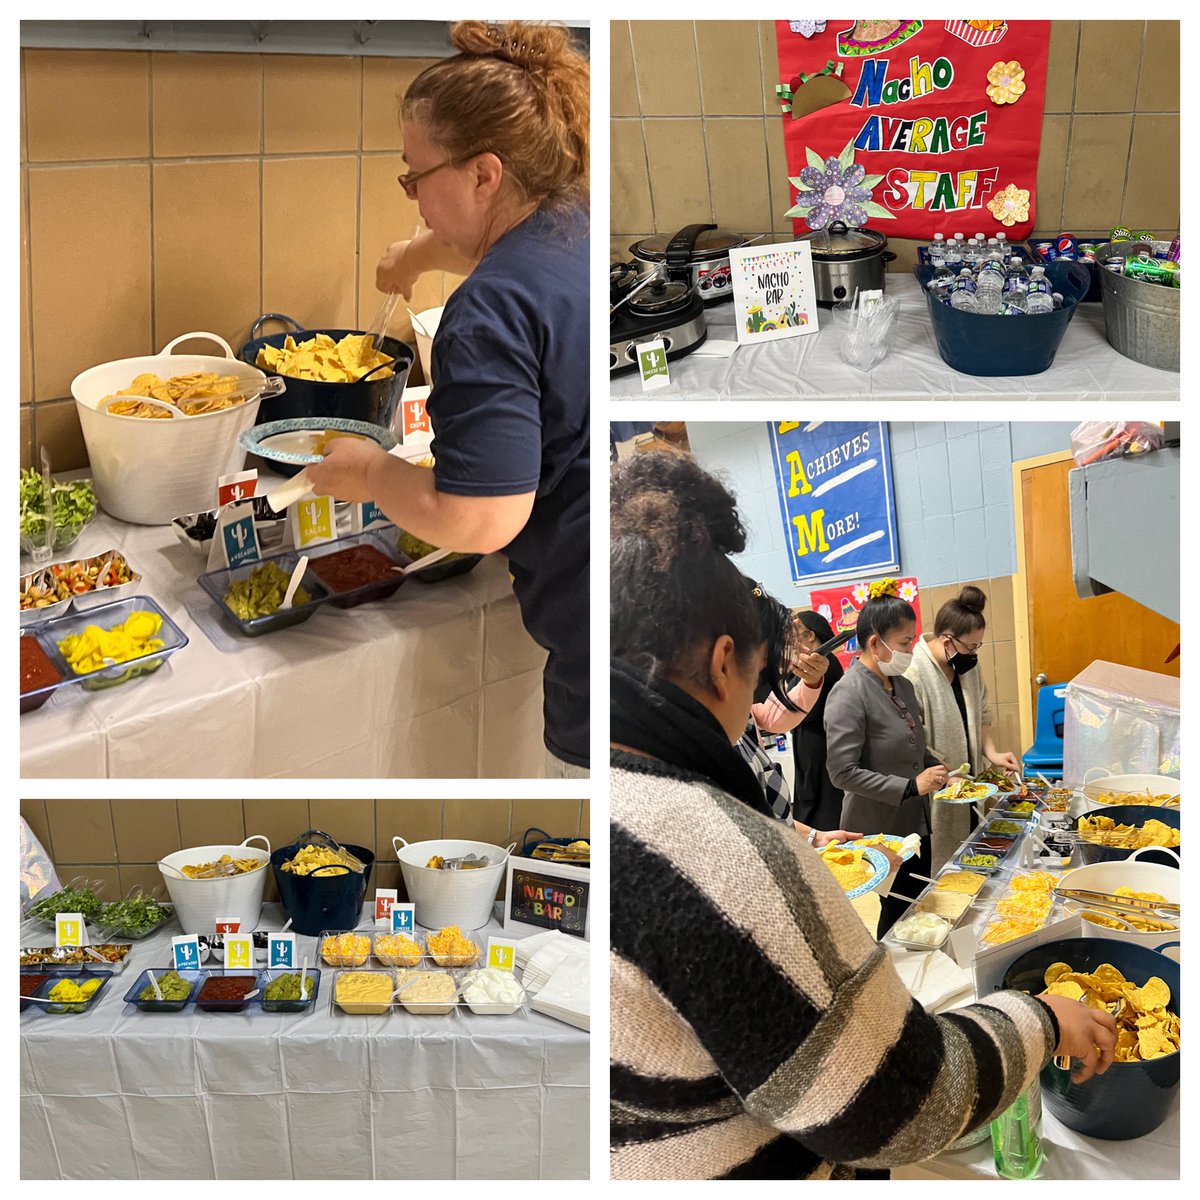 Busy but fun filled day… 5th Grade MISA Pep Rally getting our students ready… and Employee Appreciation Day “nacho average staff” celebrating our staff!